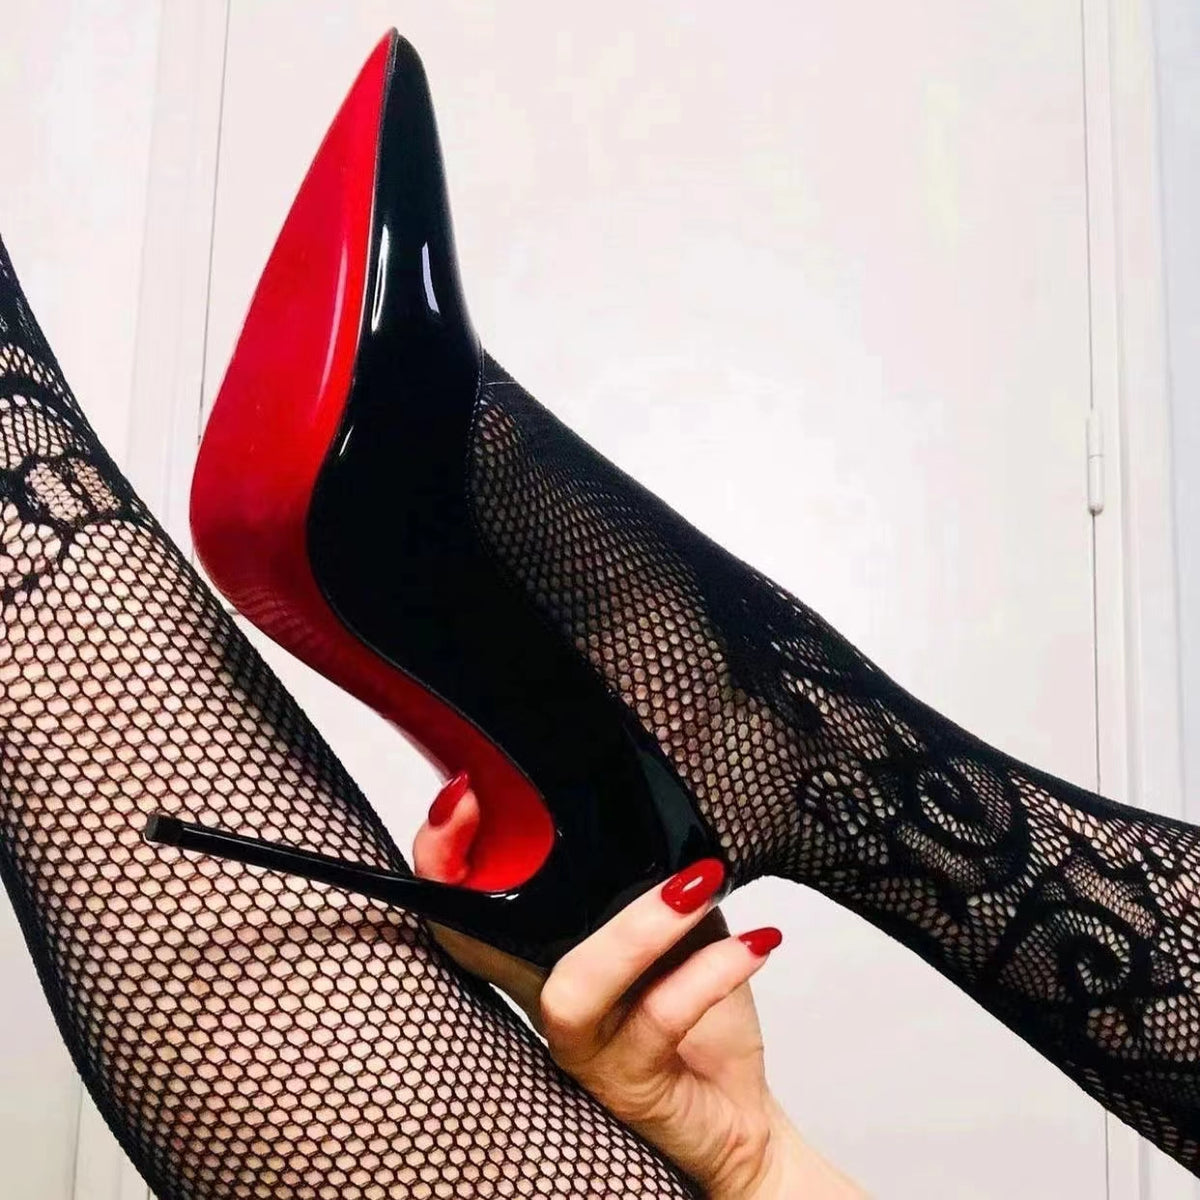 Black flirty red sole shoes DO311